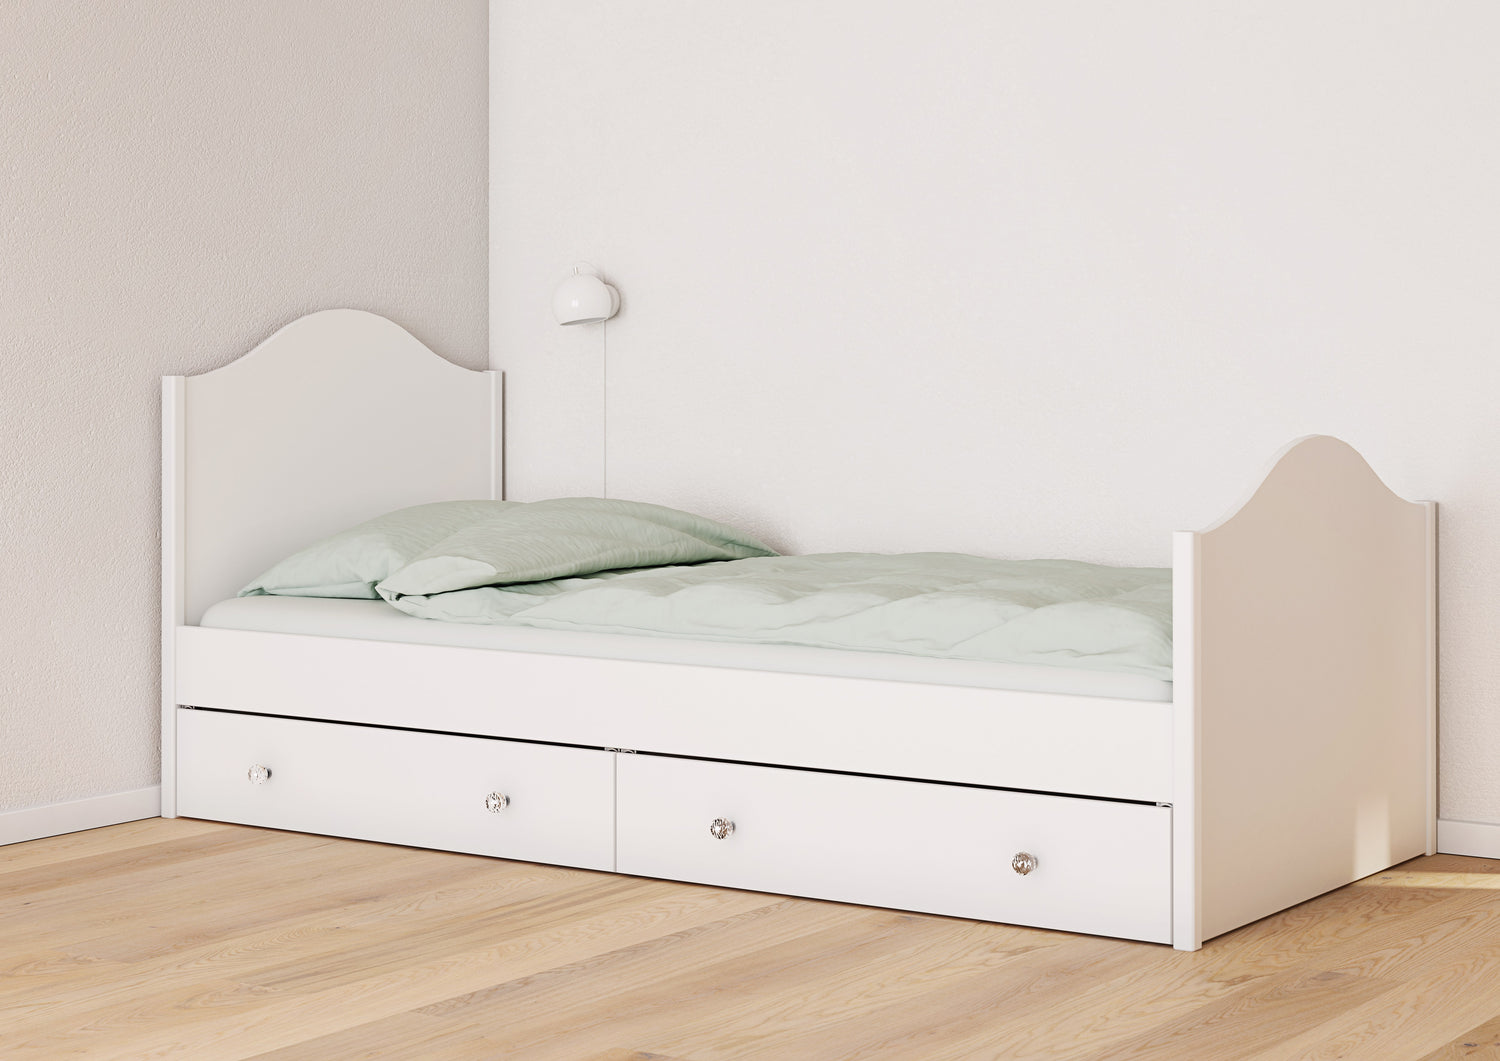 Steens Florence Single Bed With Underdrawers